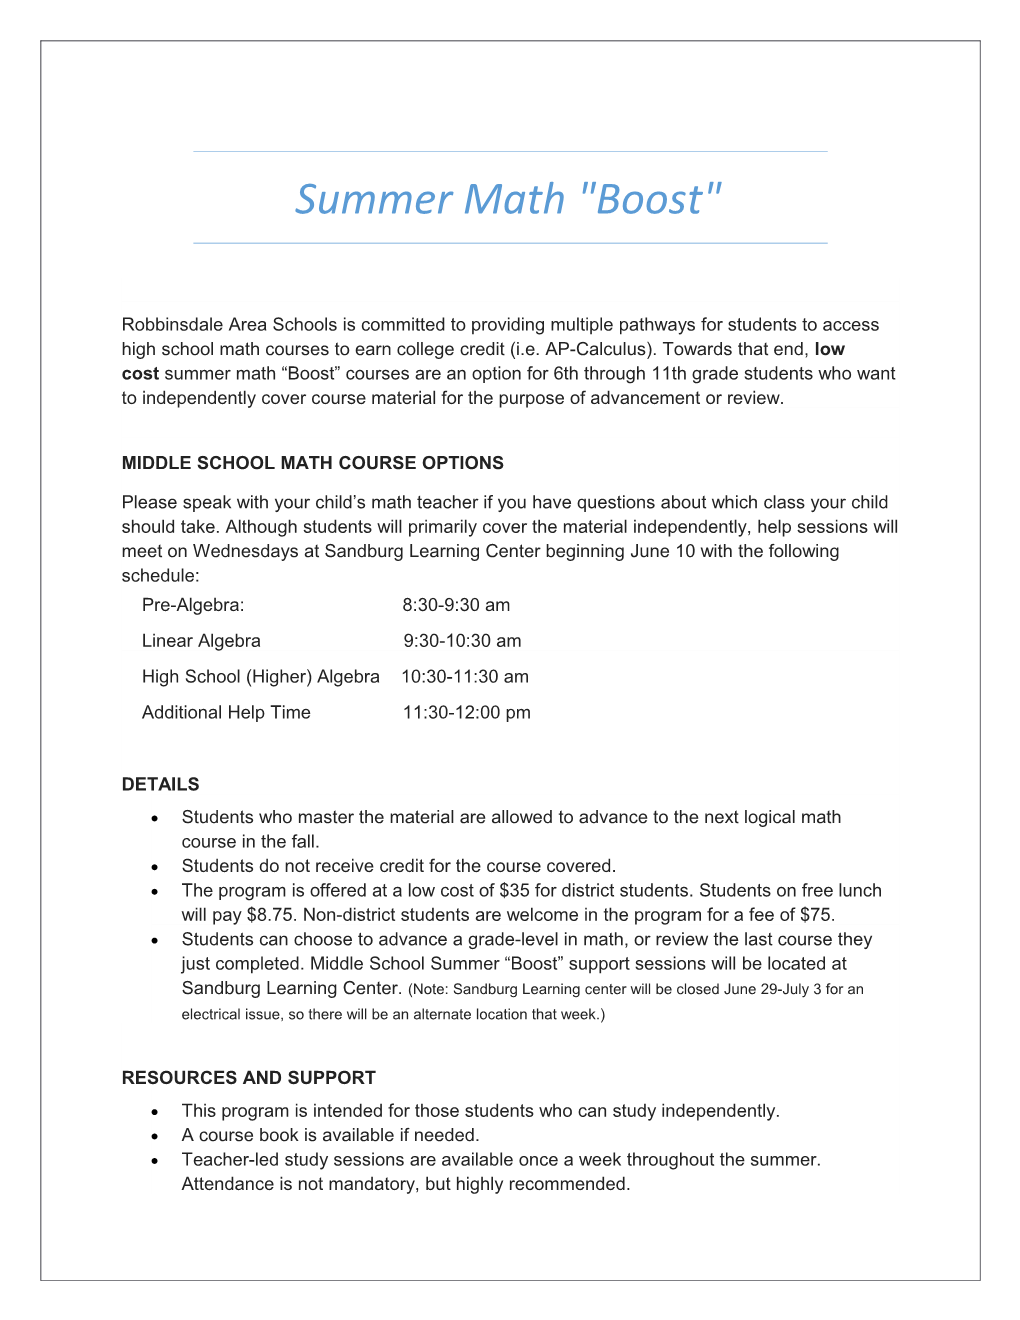 Middle School Math Course Options